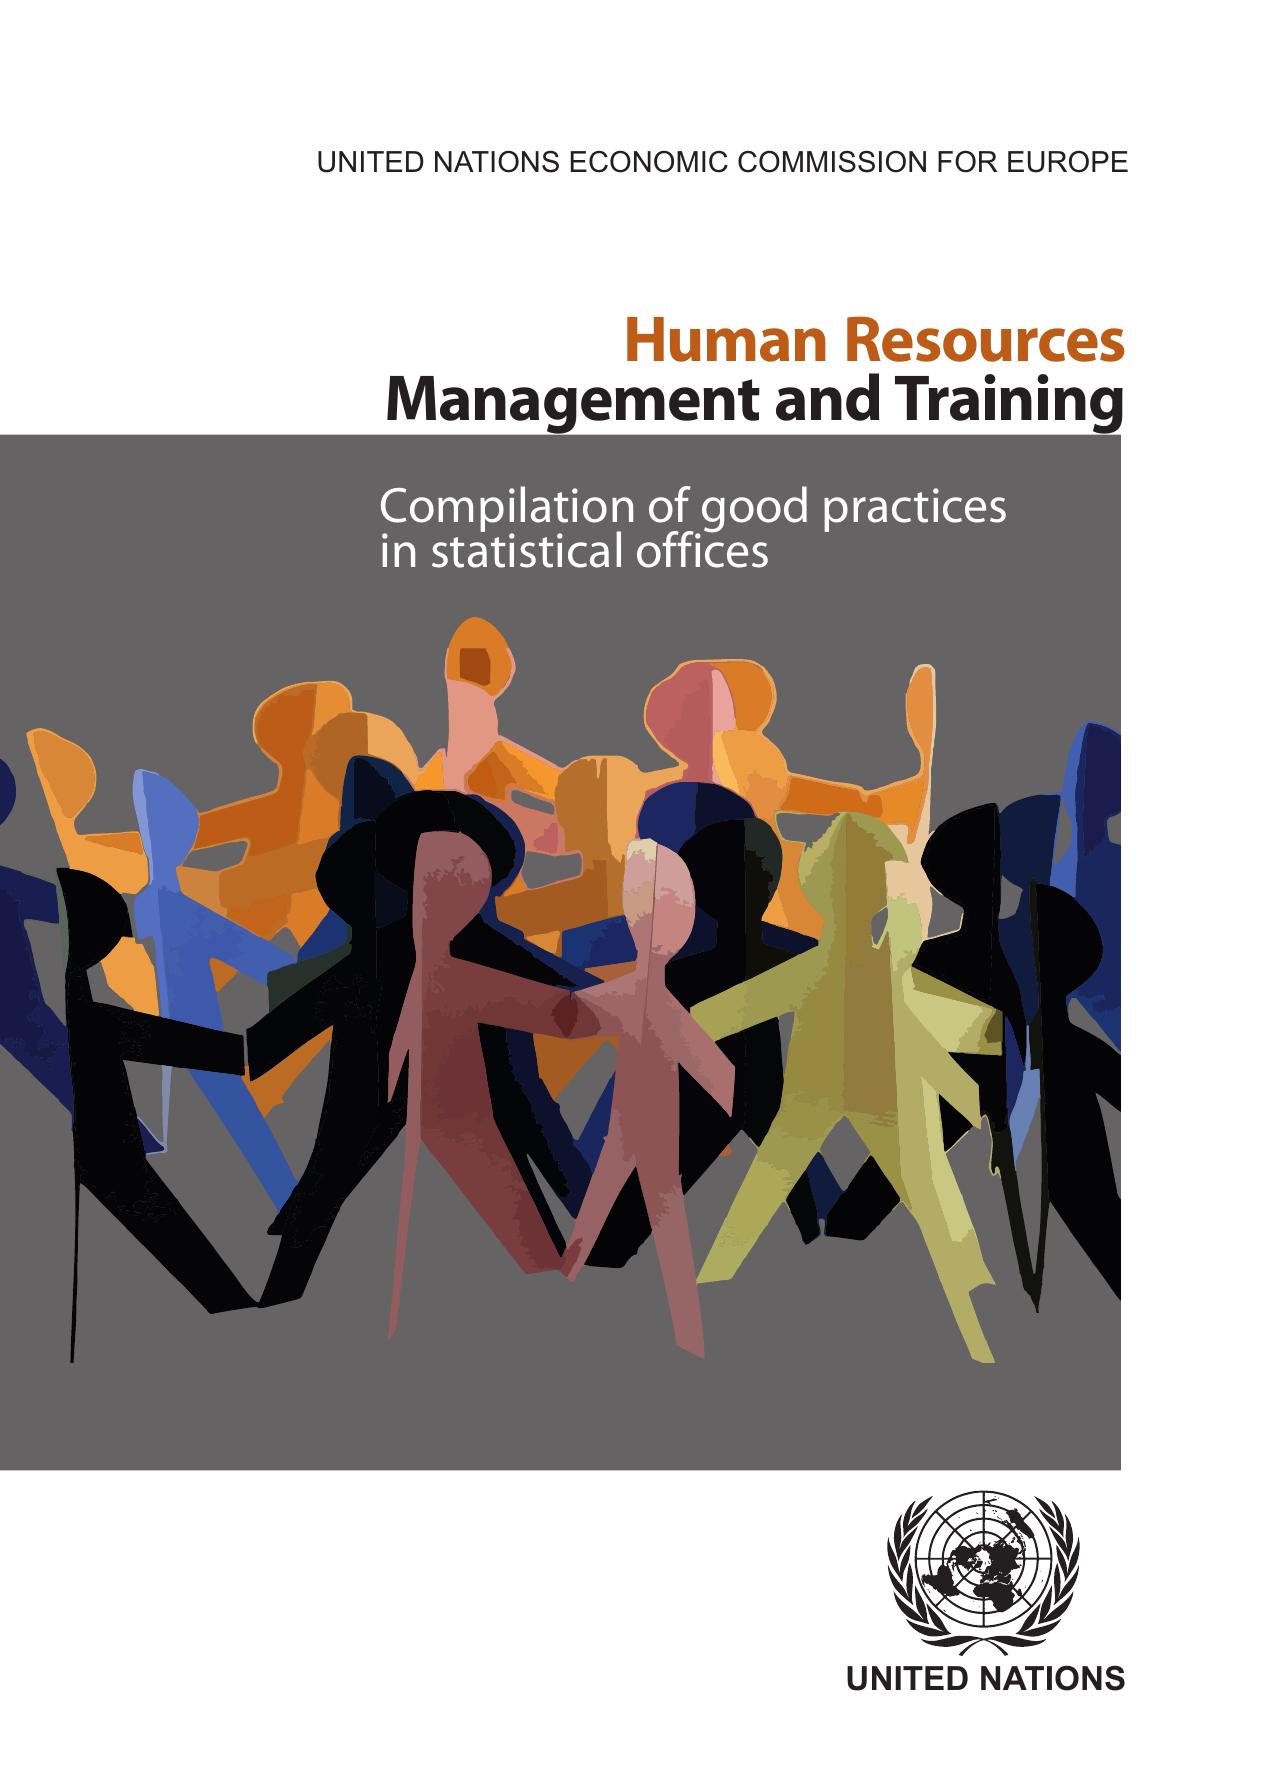 Human Resource Management and Training 2013